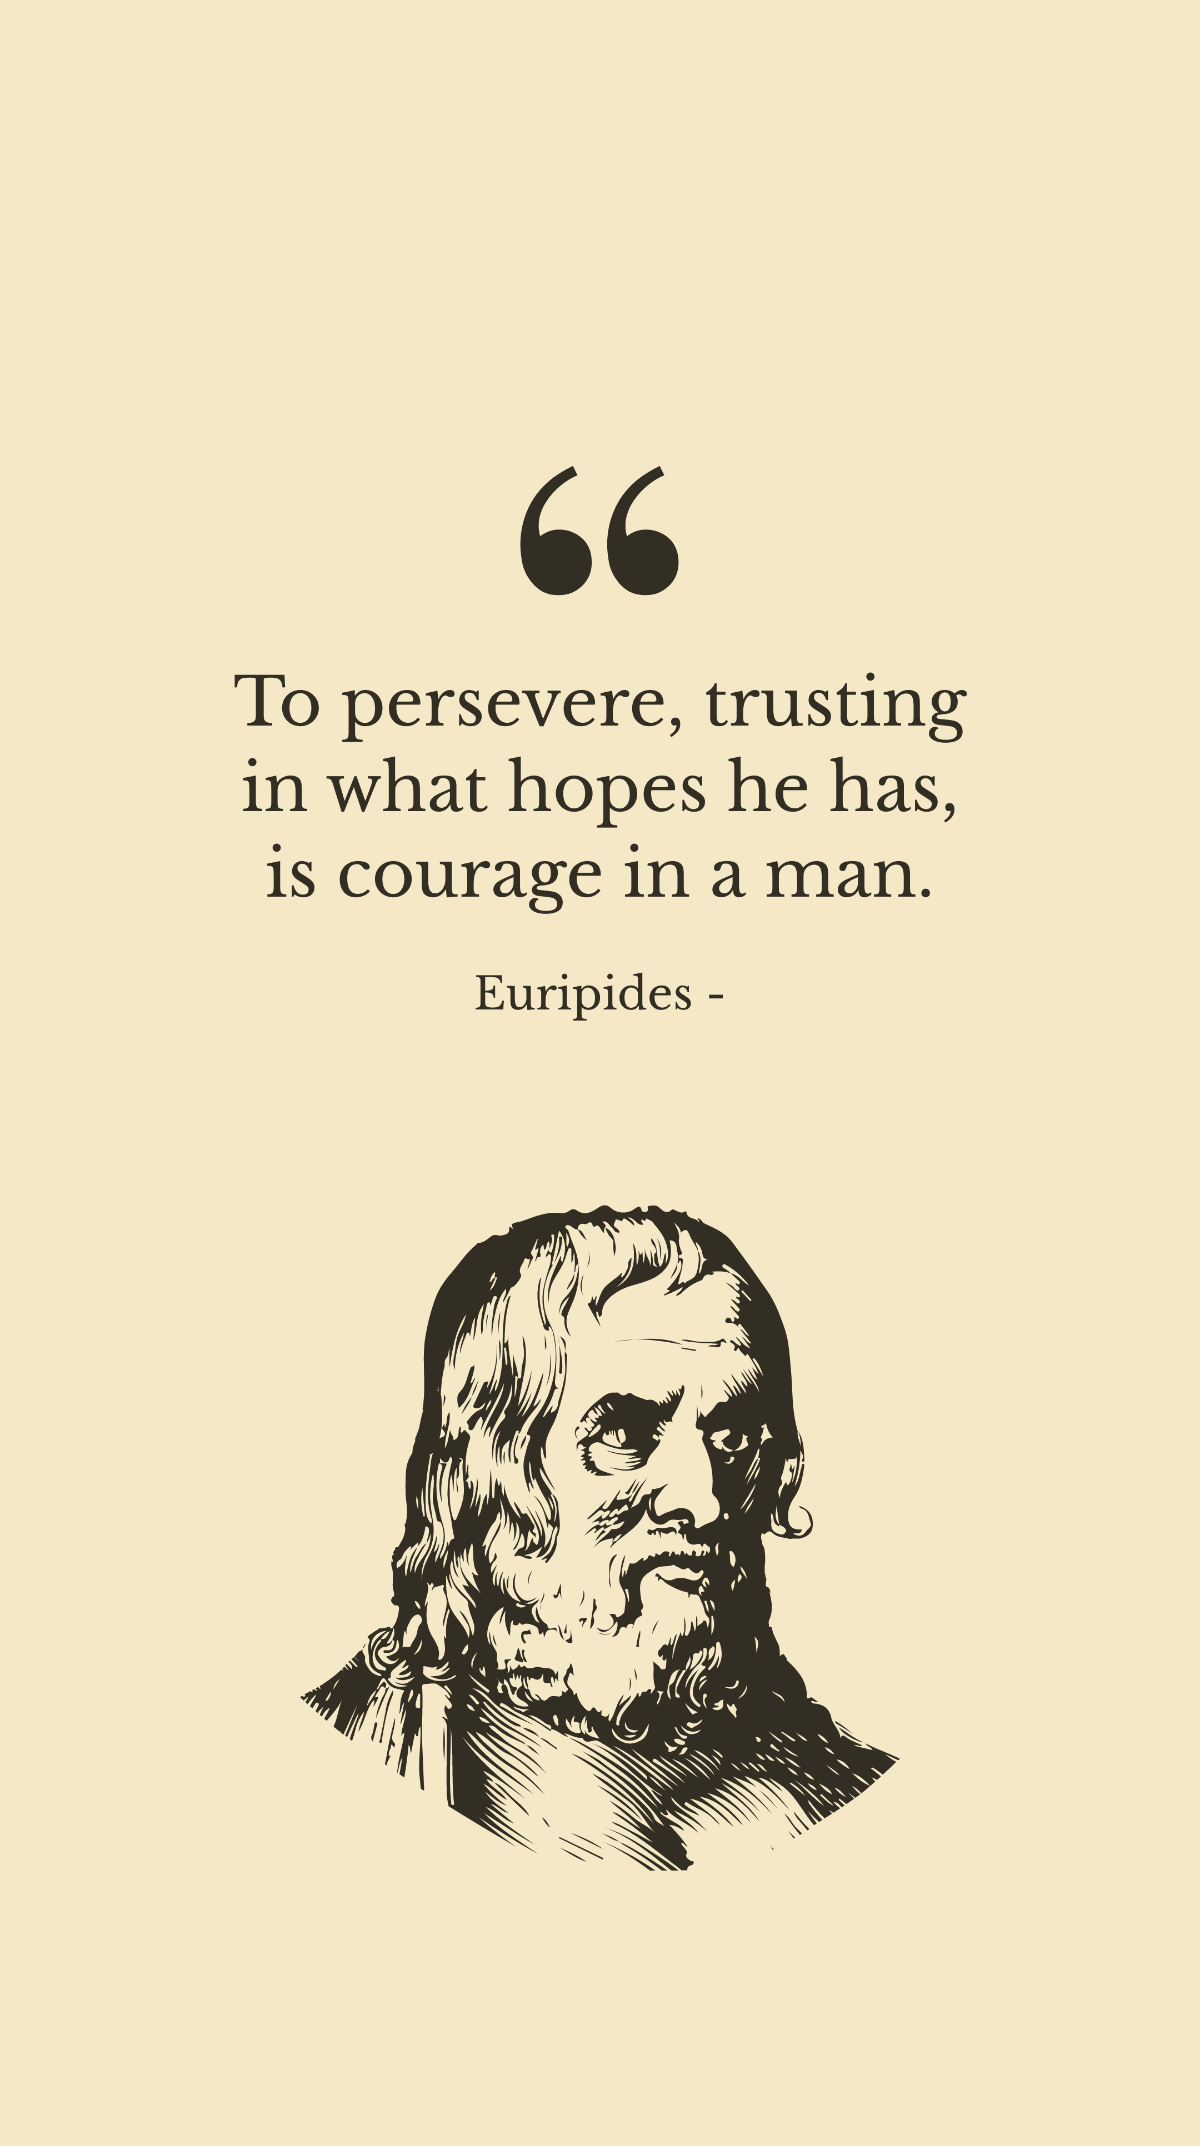 Euripides - To persevere, trusting in what hopes he has, is courage in a man. Template